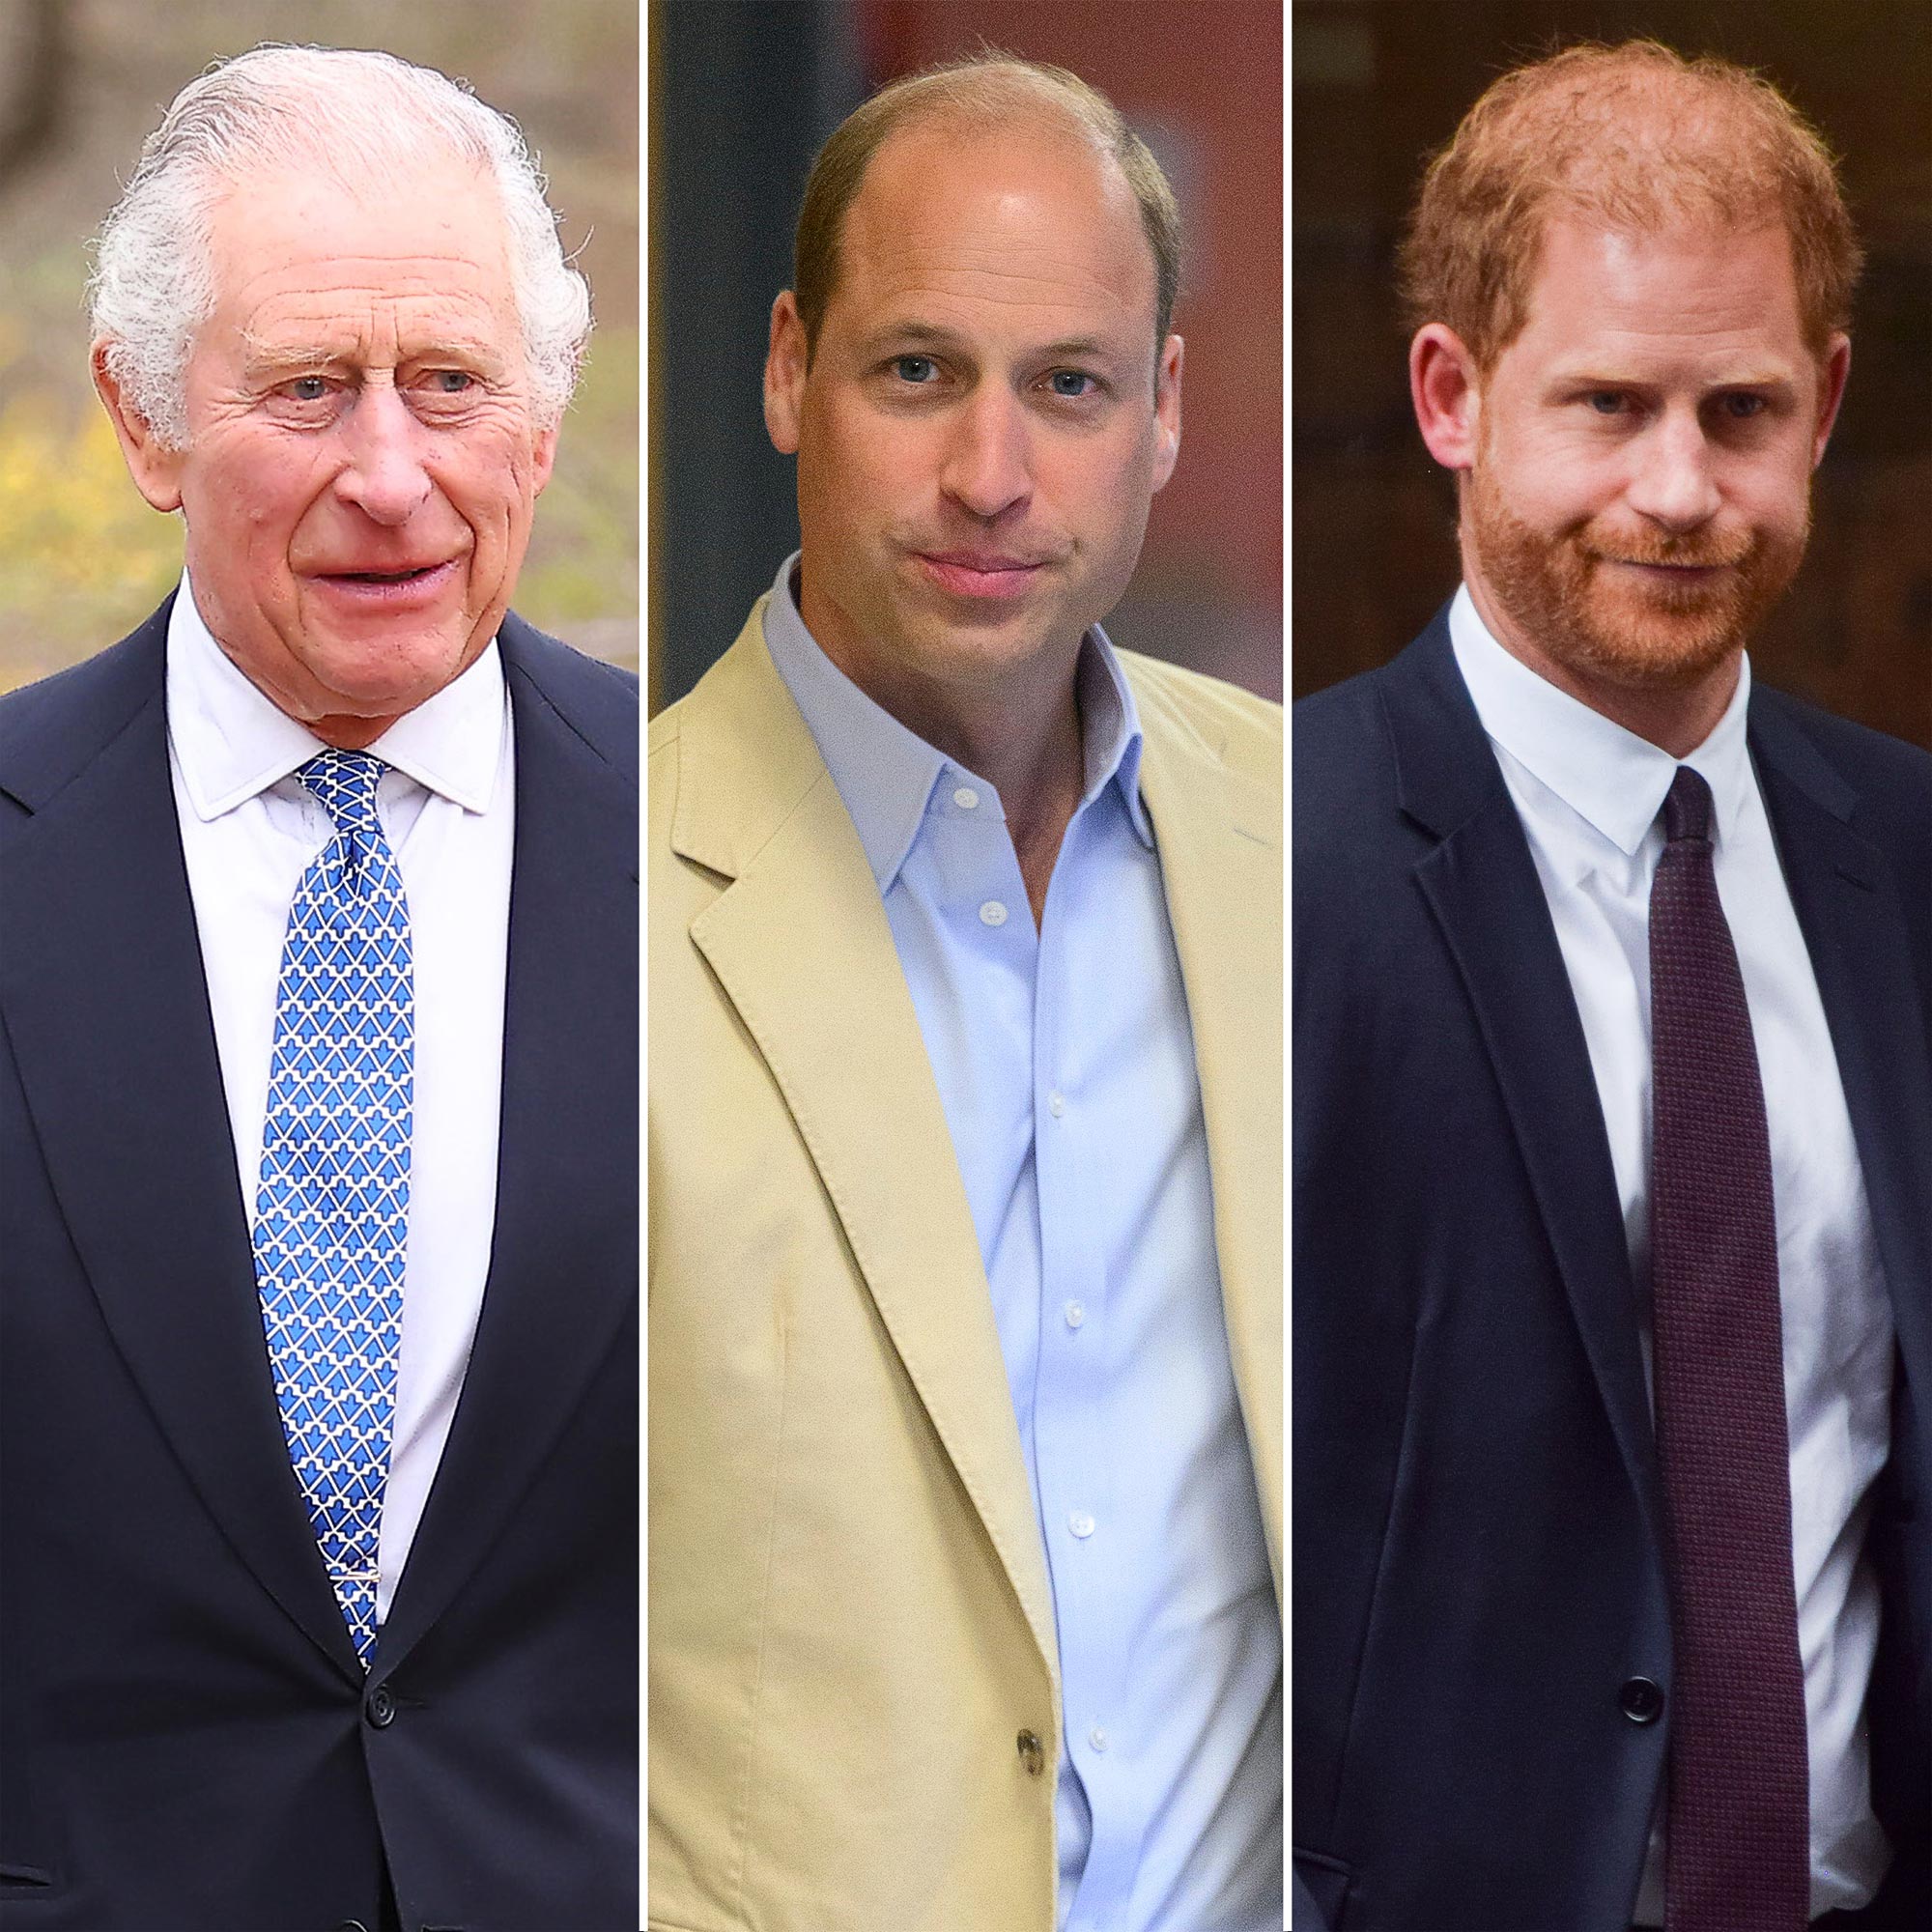 Prince Harry, King Charles Have Taken Baby Steps in Mending Relationship